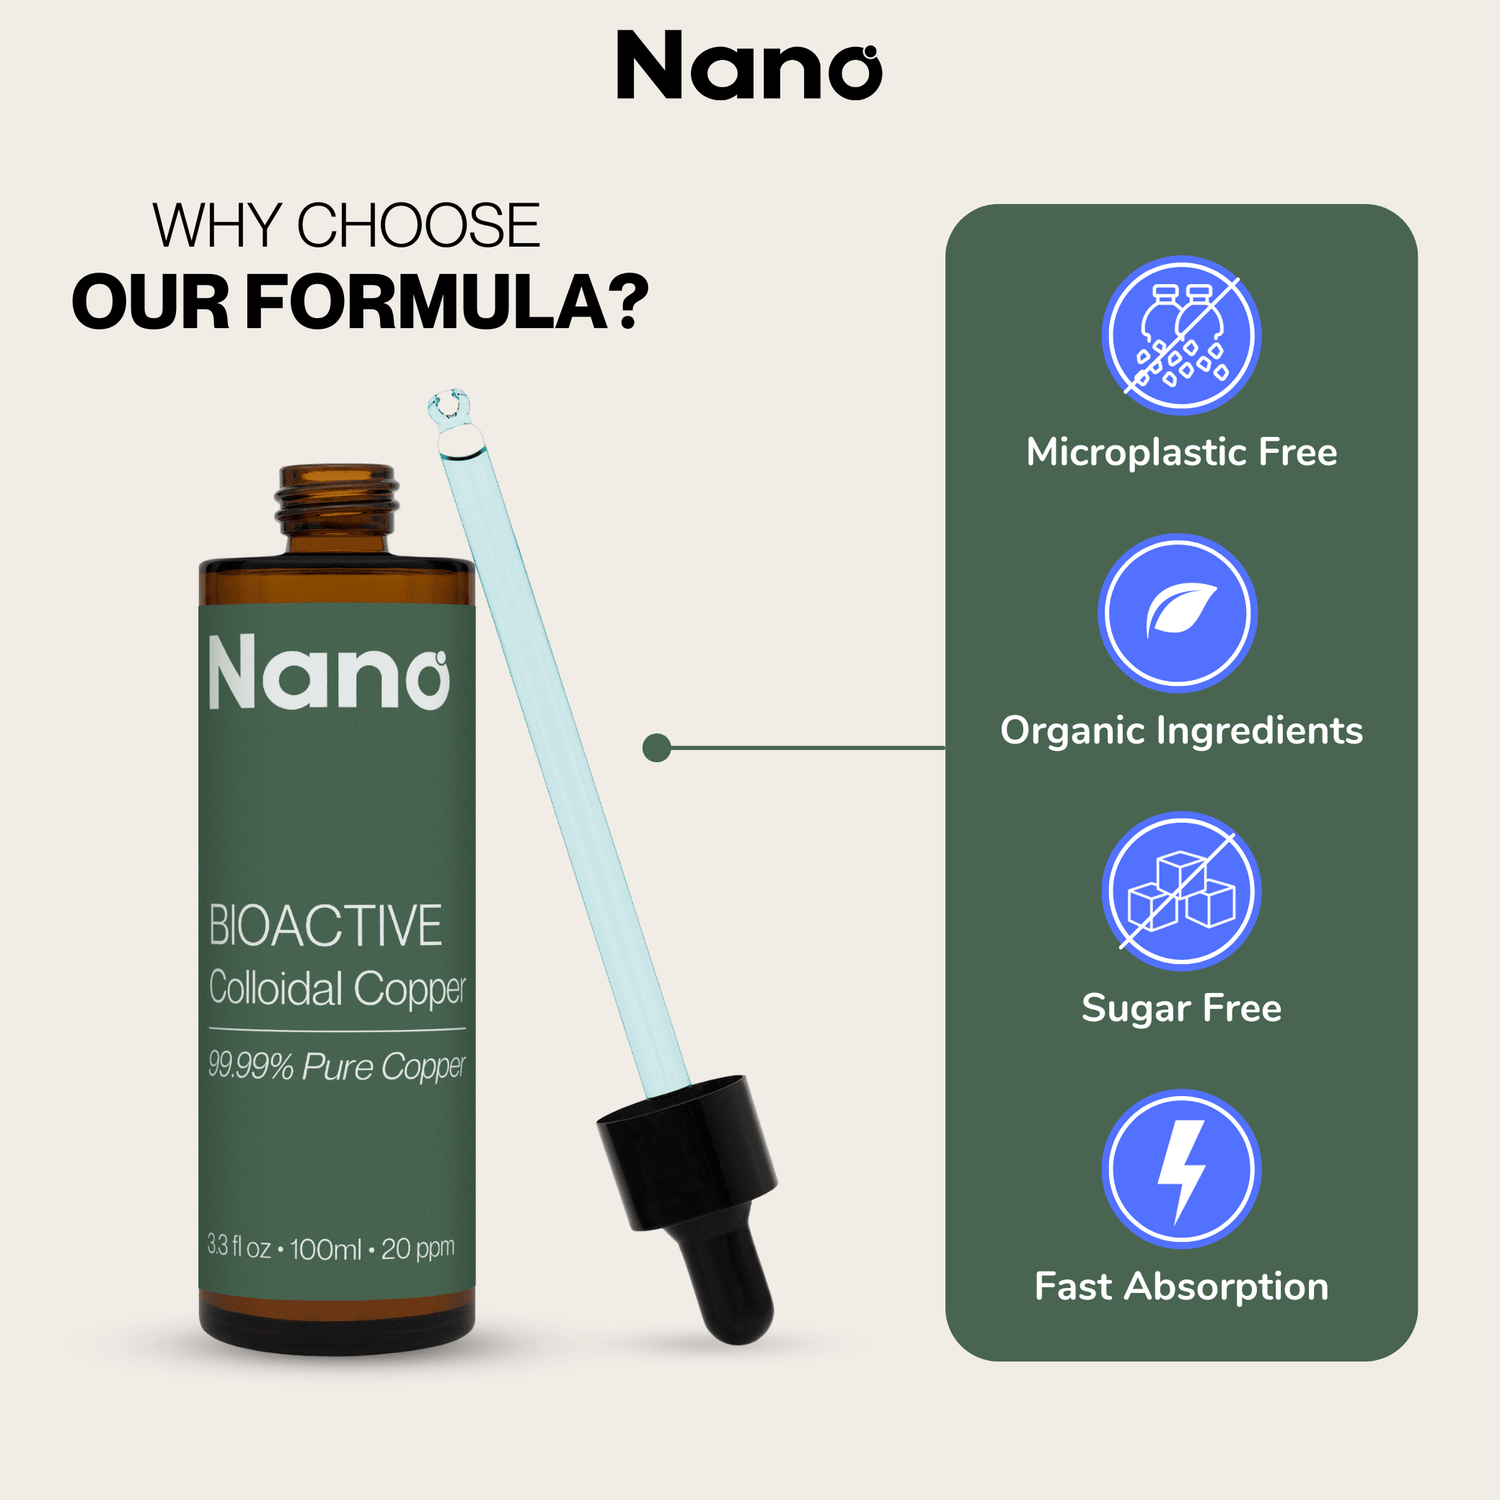 Nano bioactive colloidal copper liquid health supplement is micro plastic free, organic, sugar free, and highly bioavailable